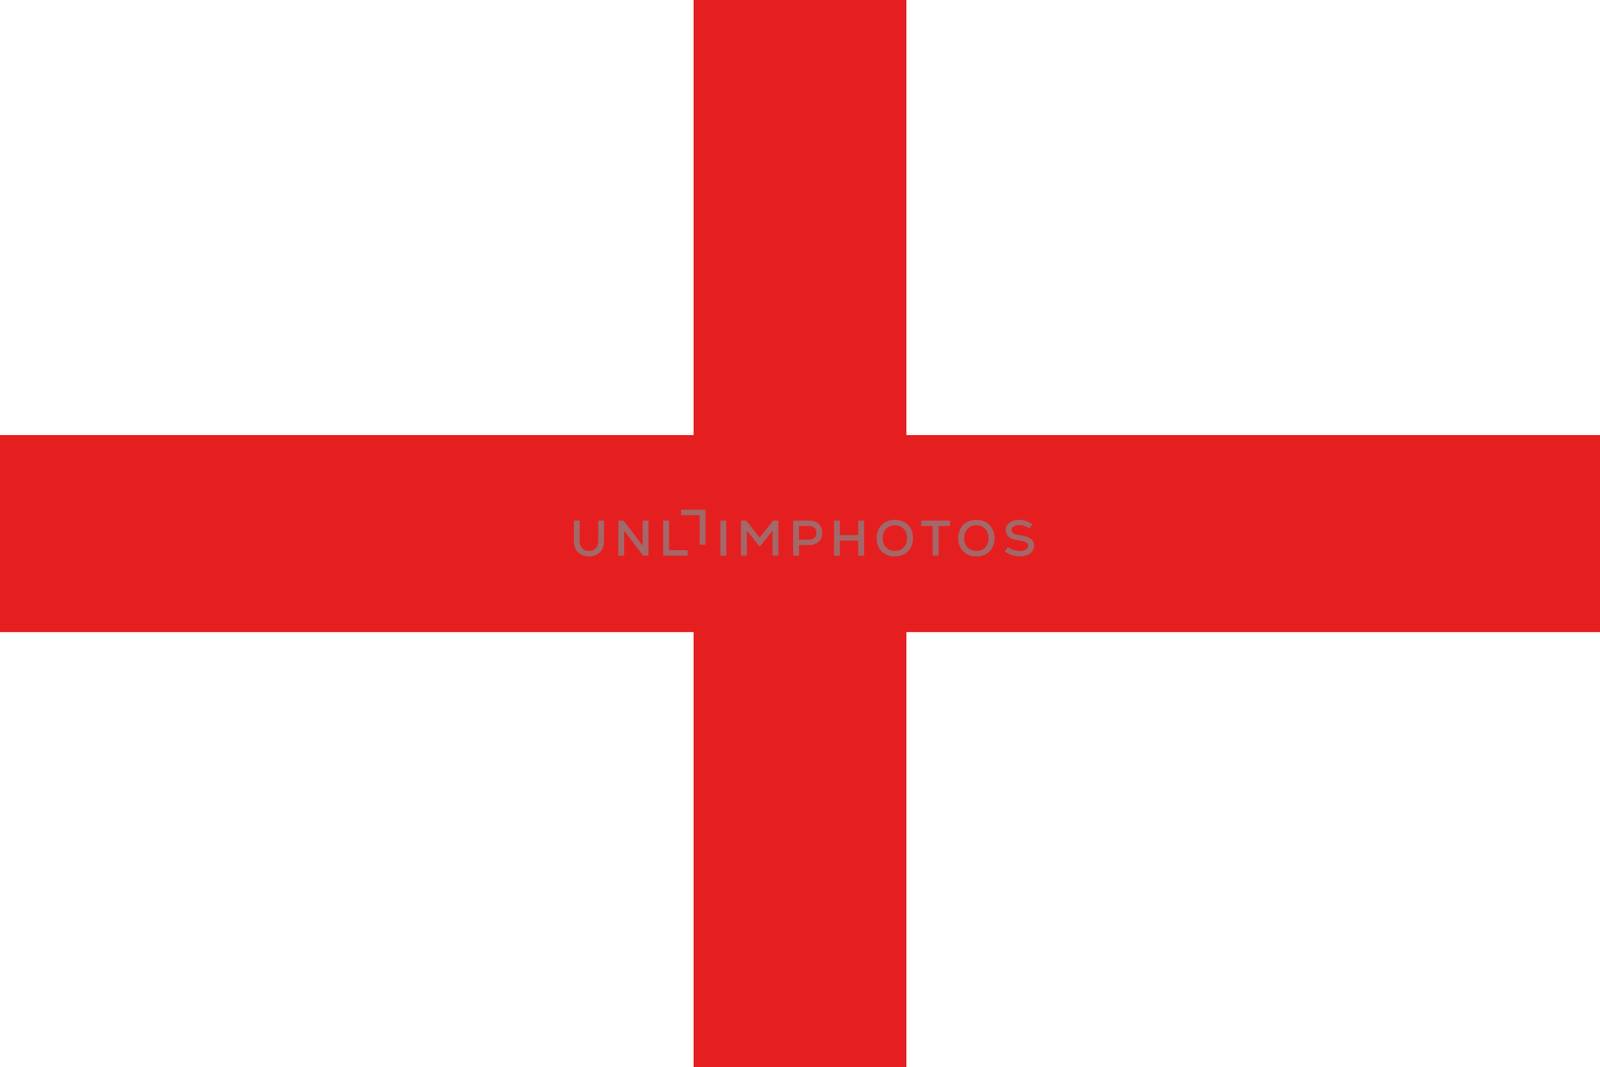 An illustration of the flag of England